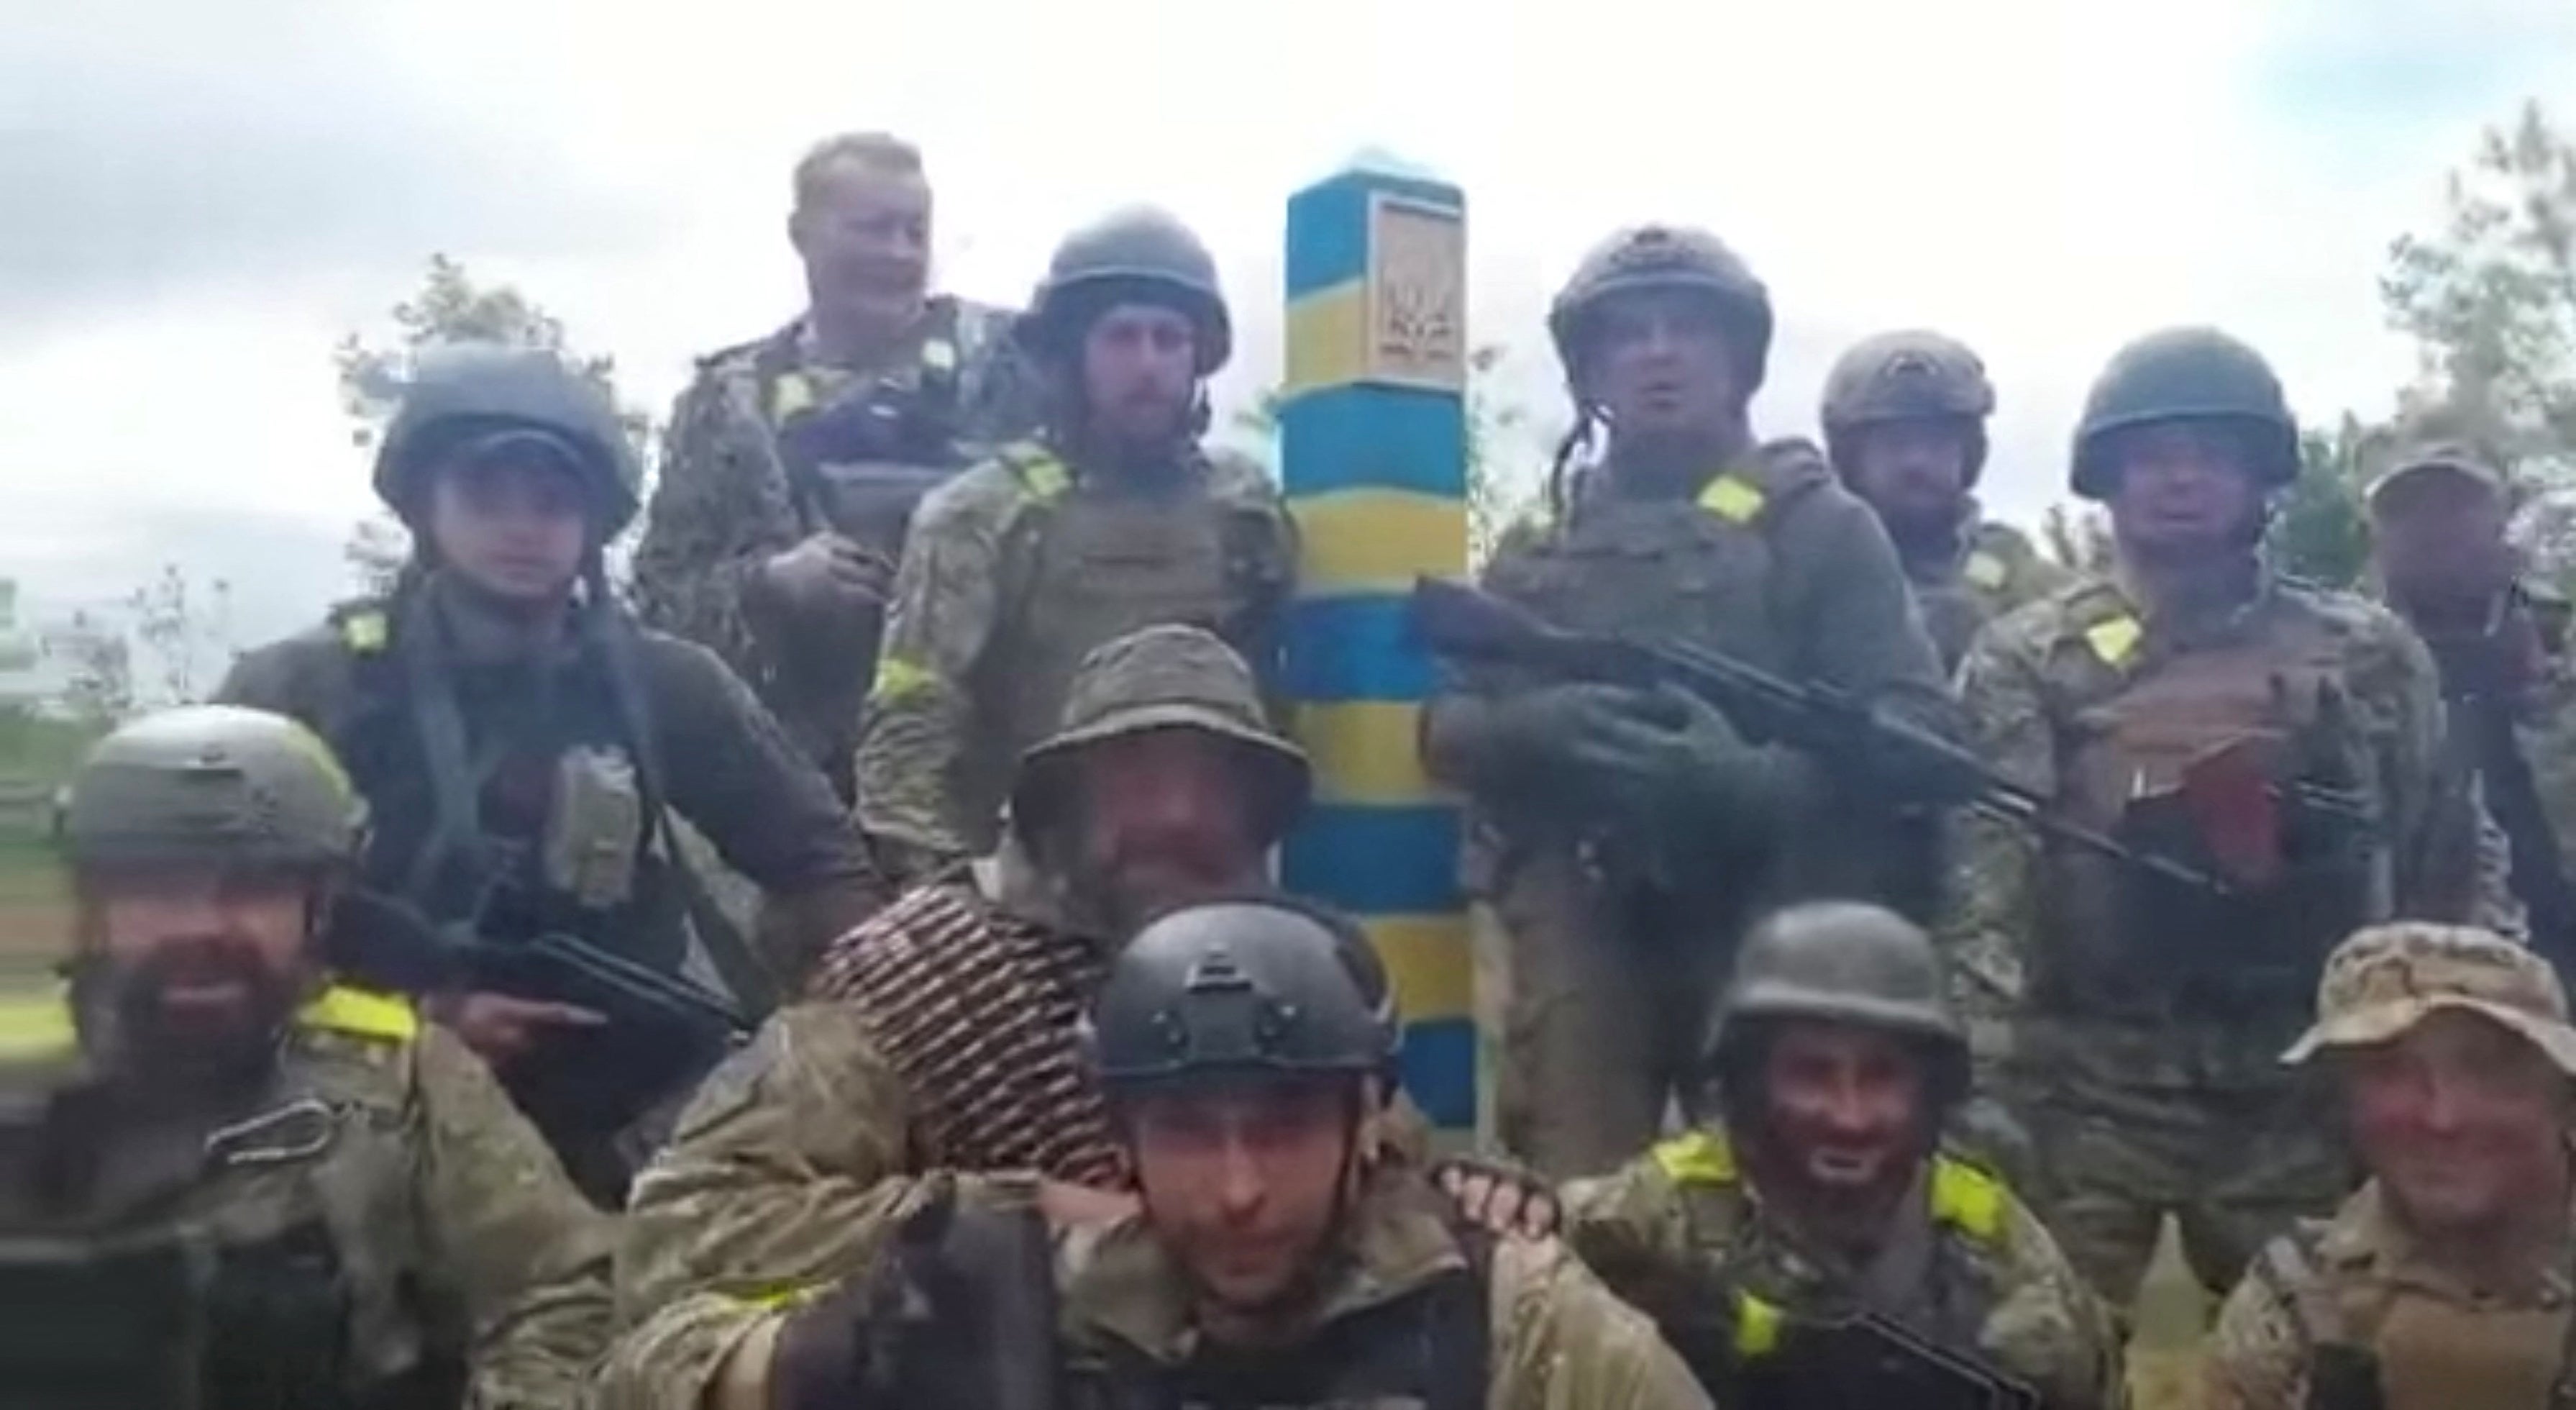 Ukrainian troops stand at the Russia border near Kharkiv on Monday